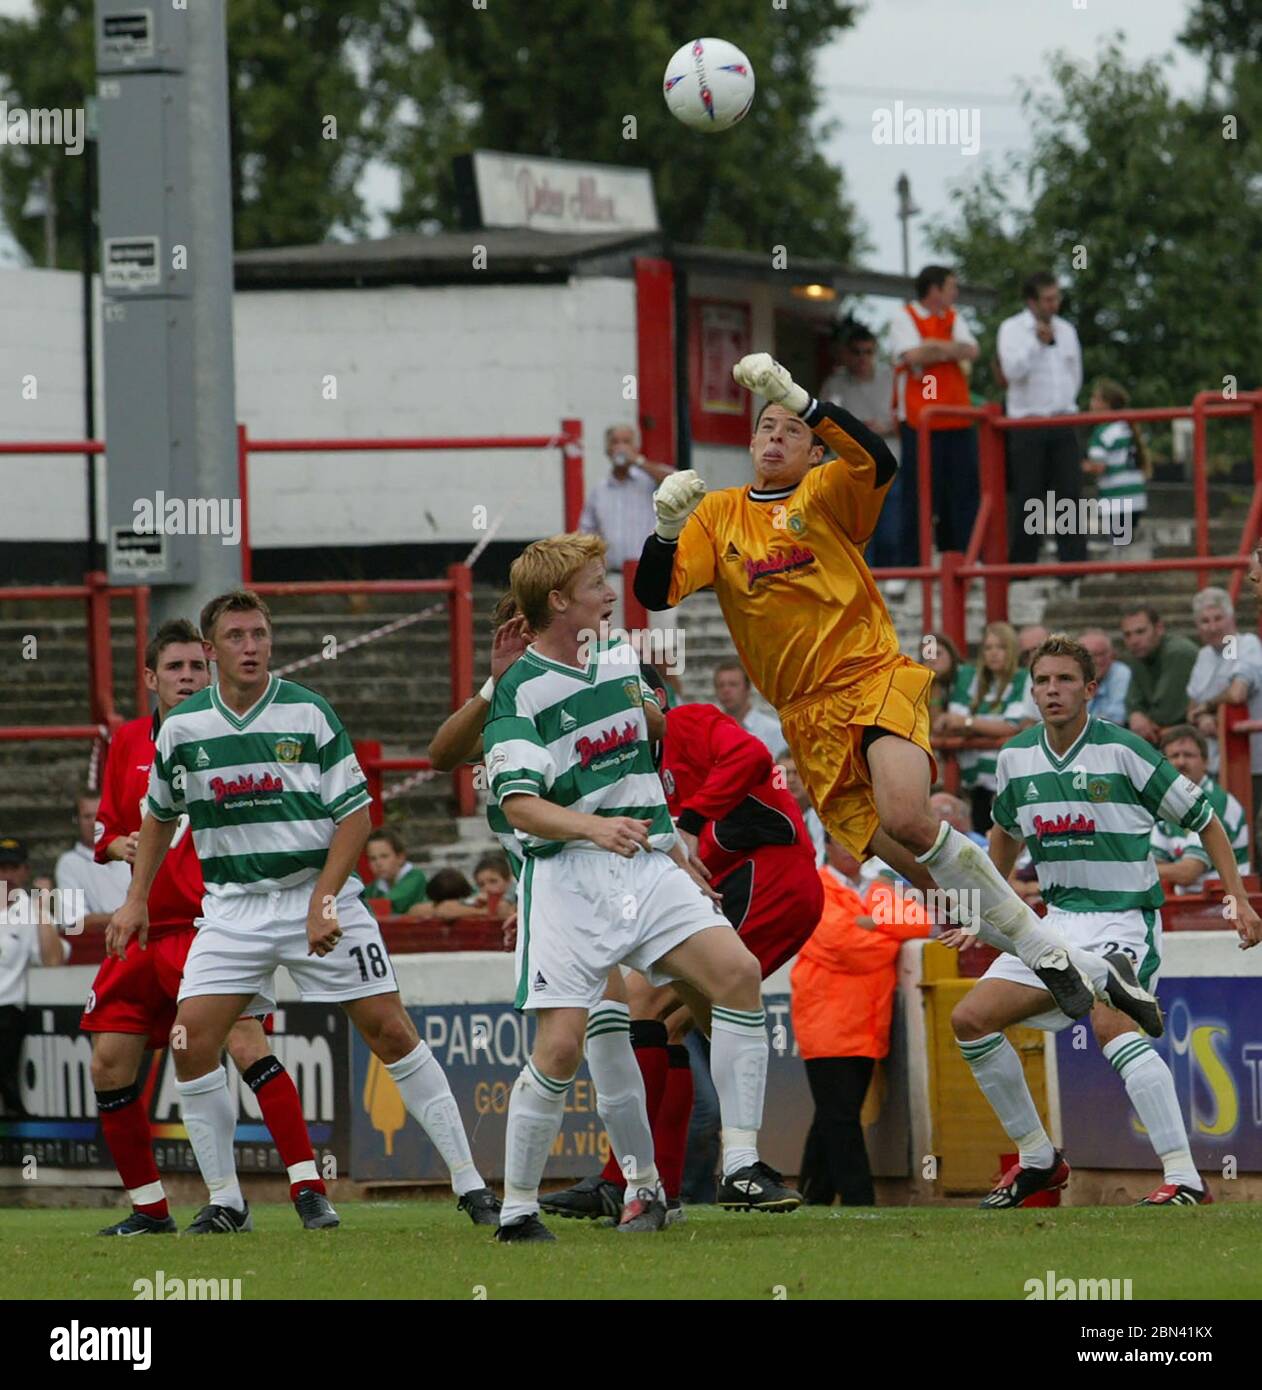 LONDON, UK. AUGUST 23: CHRIS WEALE of Yeovil Town (Yellow shirt) during League Division 3 between Leyton Orient and Yeovil Town at Matchroom stadium, Stock Photo